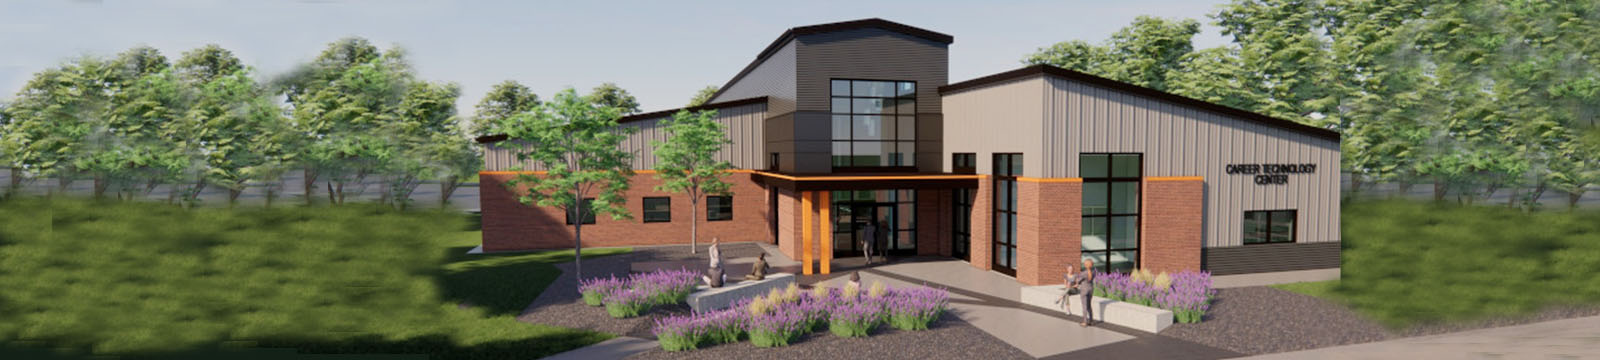 Artist rendering of the future Career Technology Center at Cowley College